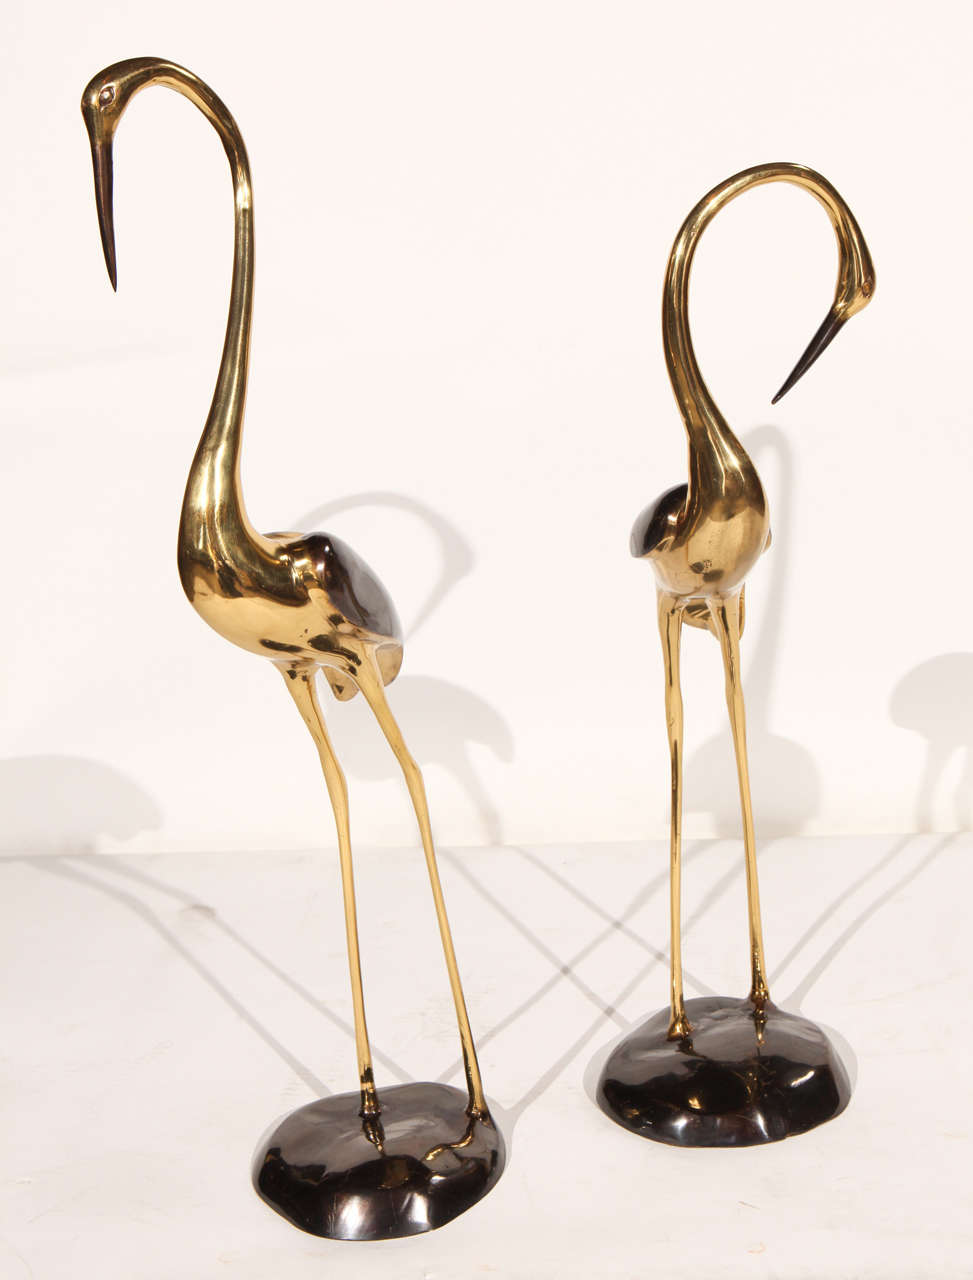 Pair of vintage brass and black chrome cranes. Note that there is some scruffing on the bases. One crane is 26.5 inches tall and the other is 23 inches tall.